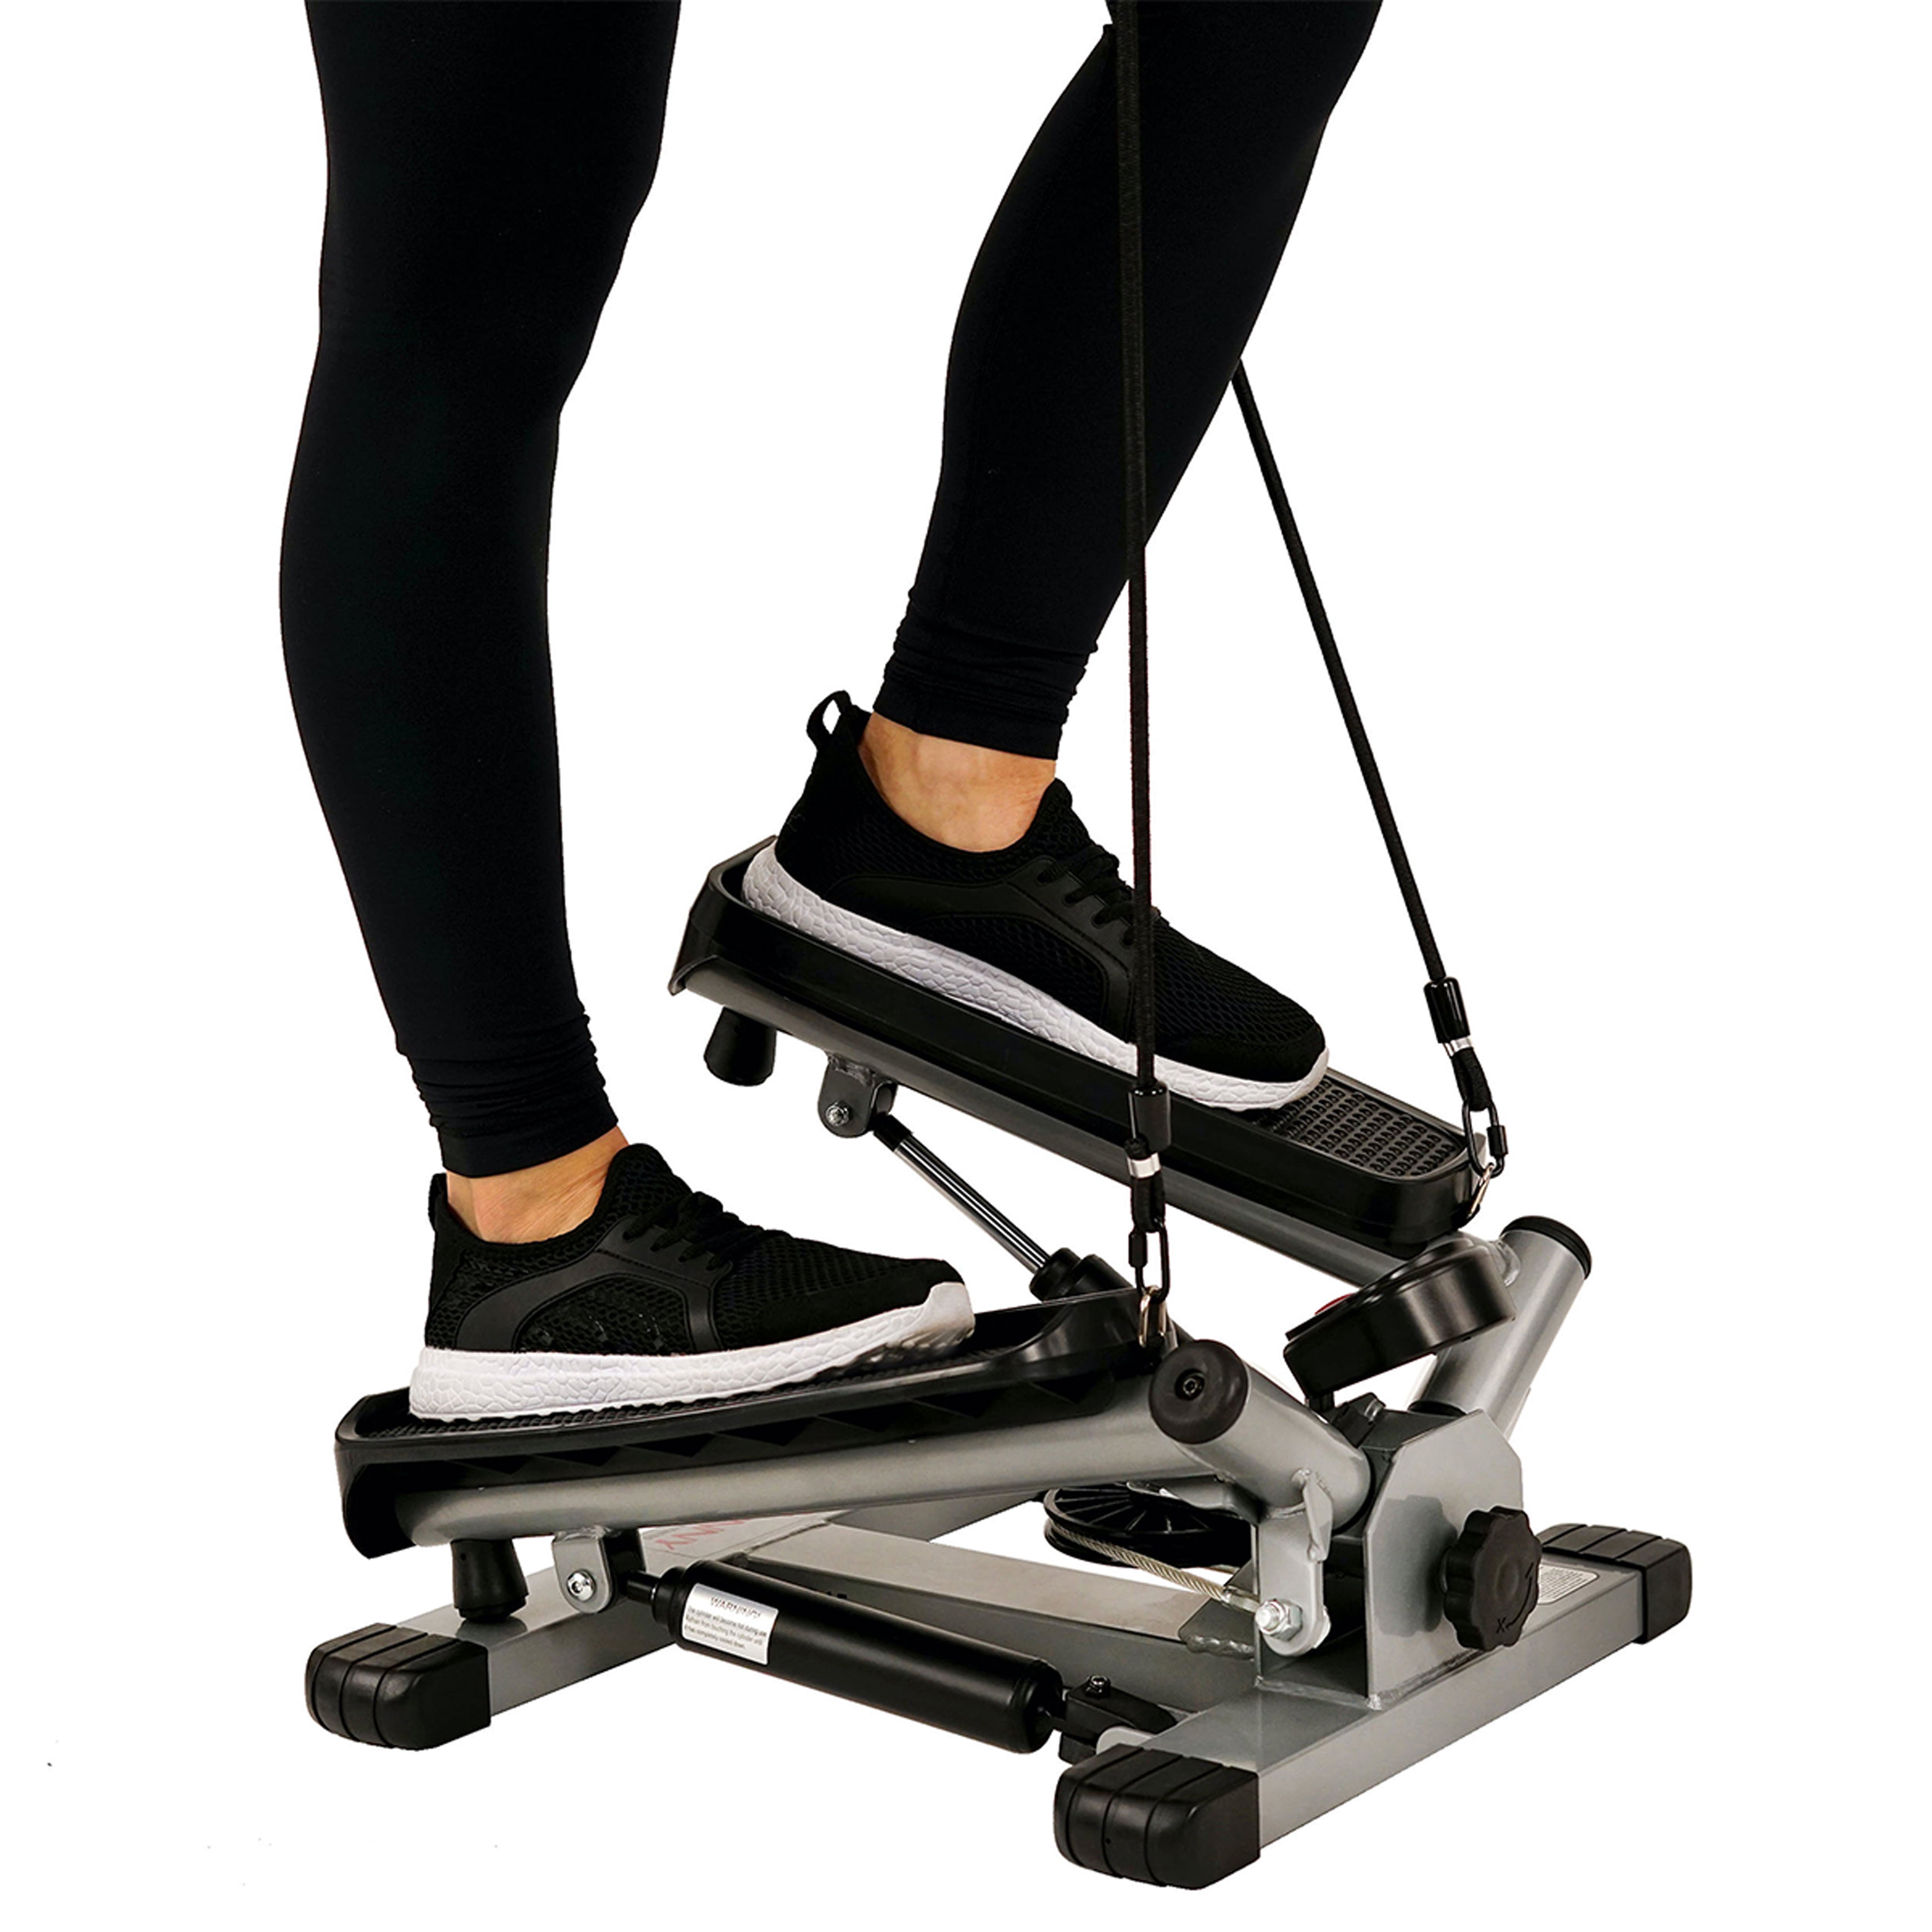 Here's Why Everyone Is Loving This Trending Mini-Stepper Machine!